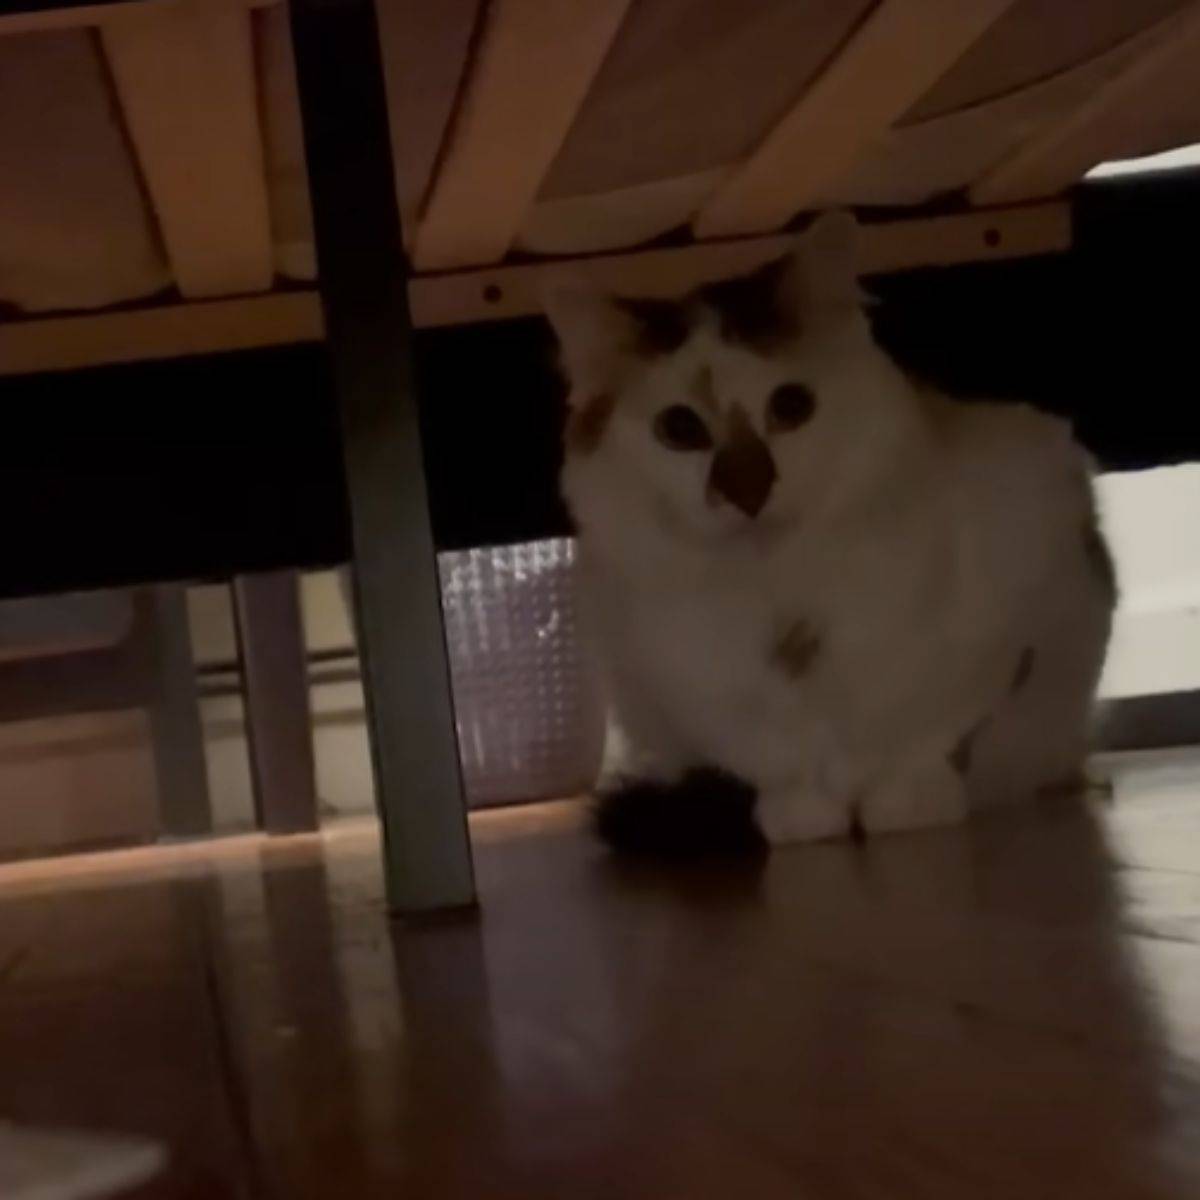 the shy cat hides under the bed